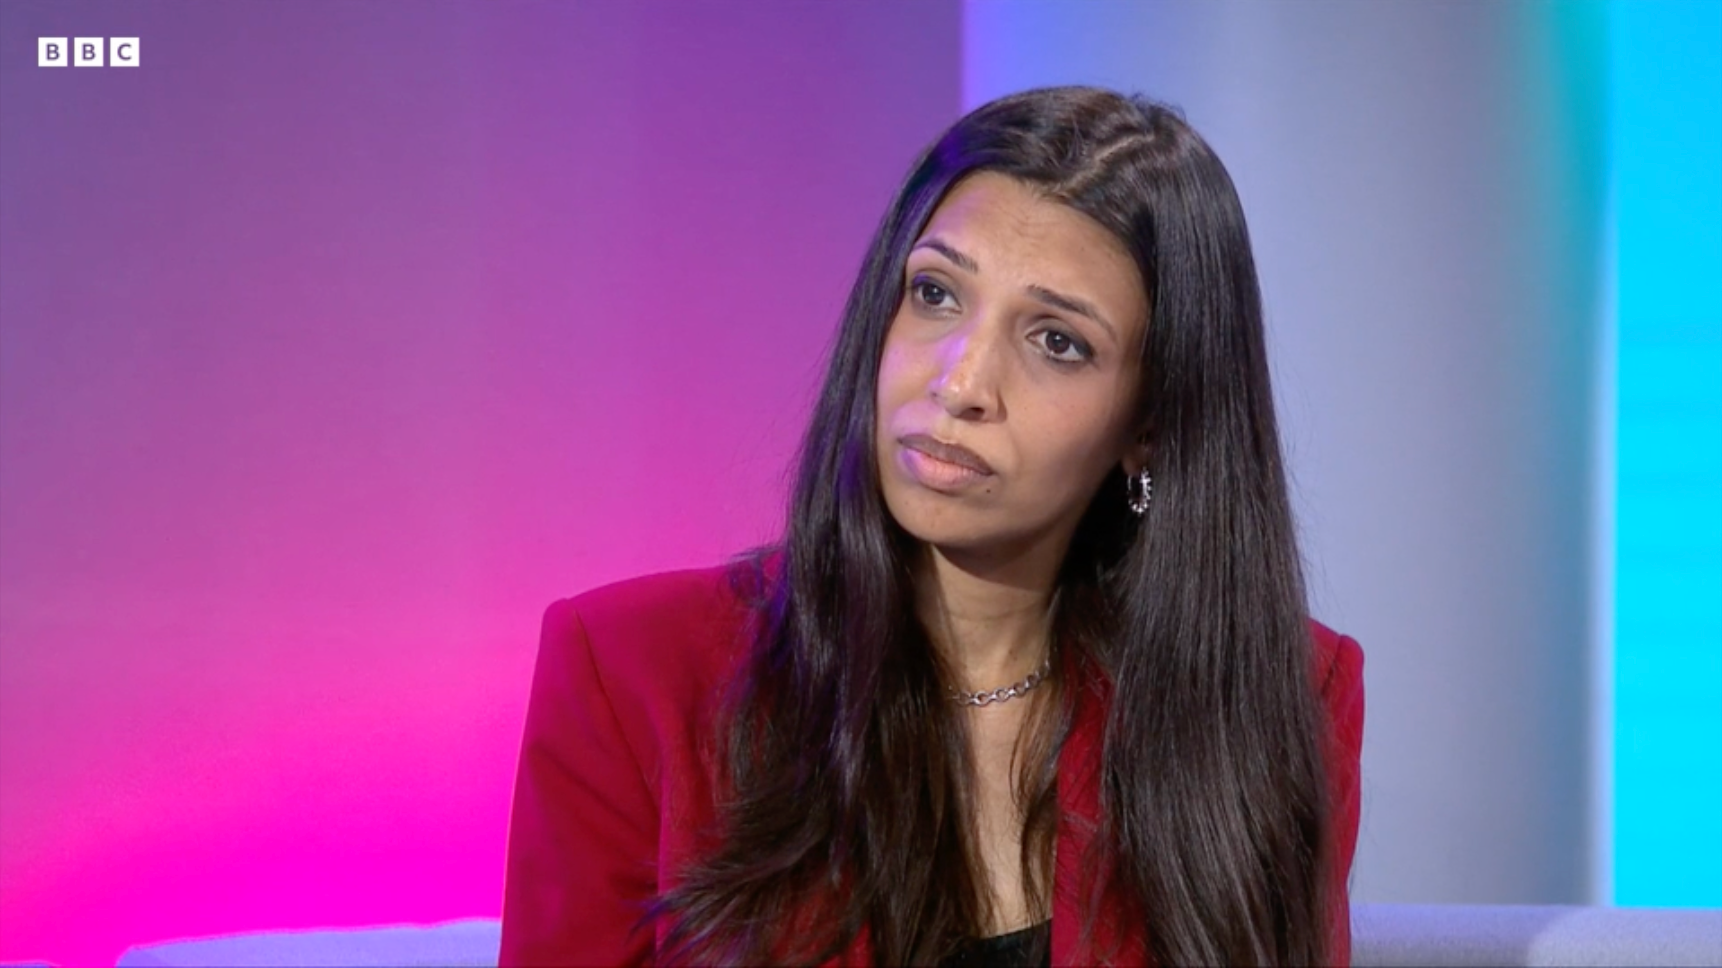 Faiza Shaheen is interviewed on BBC Newsnight hours after her deselection is confirmed